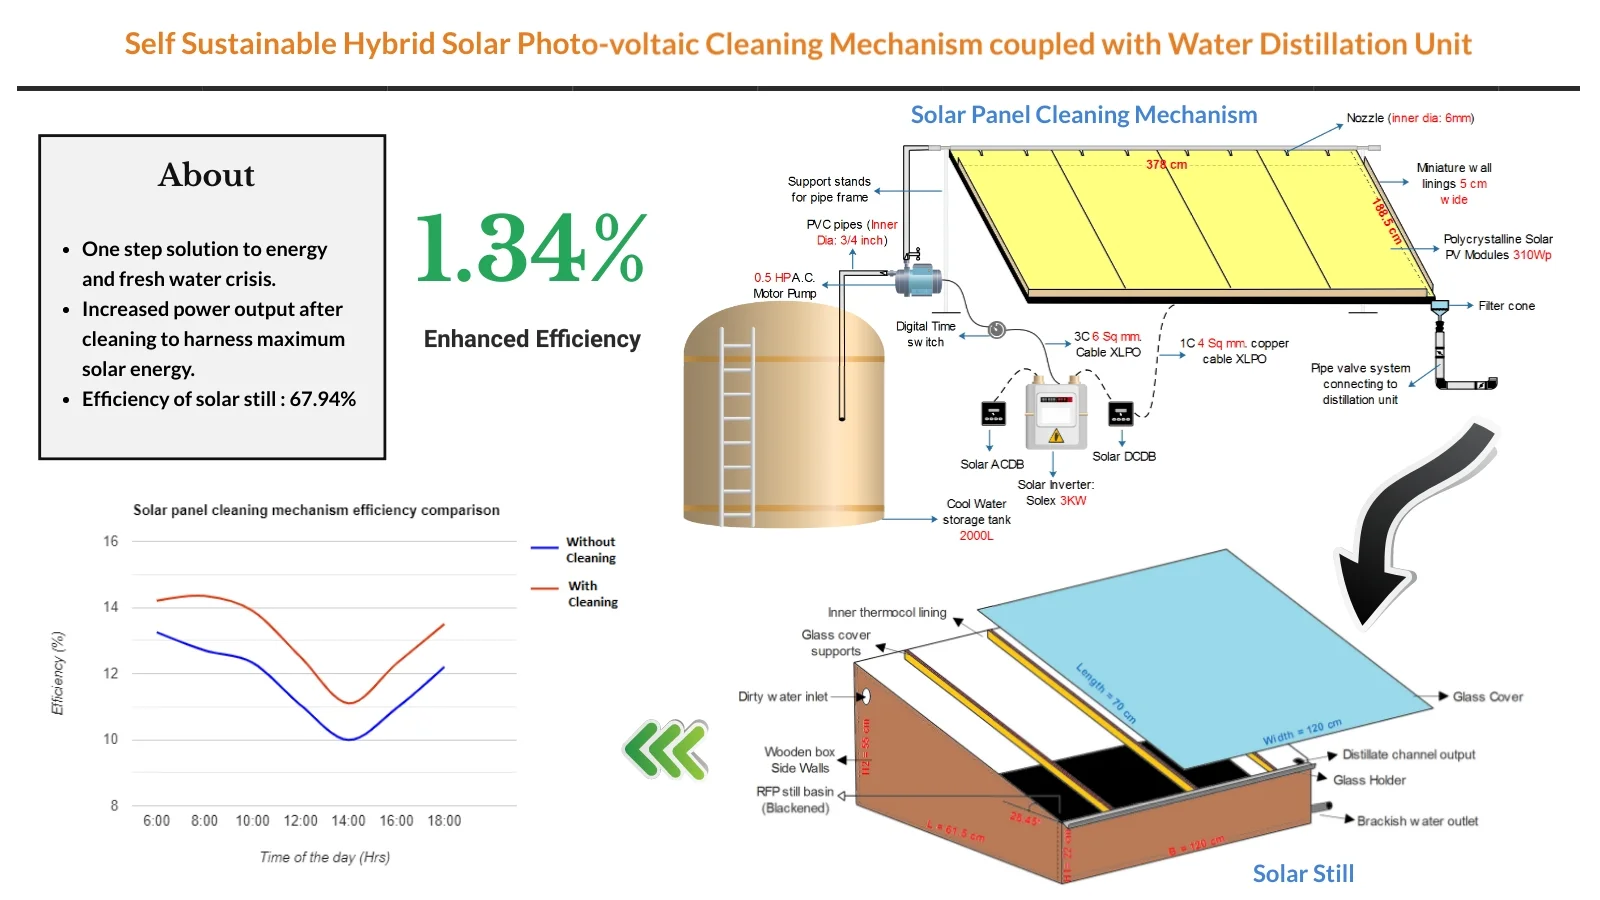 Experimental study of self-sustainable hybrid solar photovoltaic cleaning mechanism coupled with water distillation unit